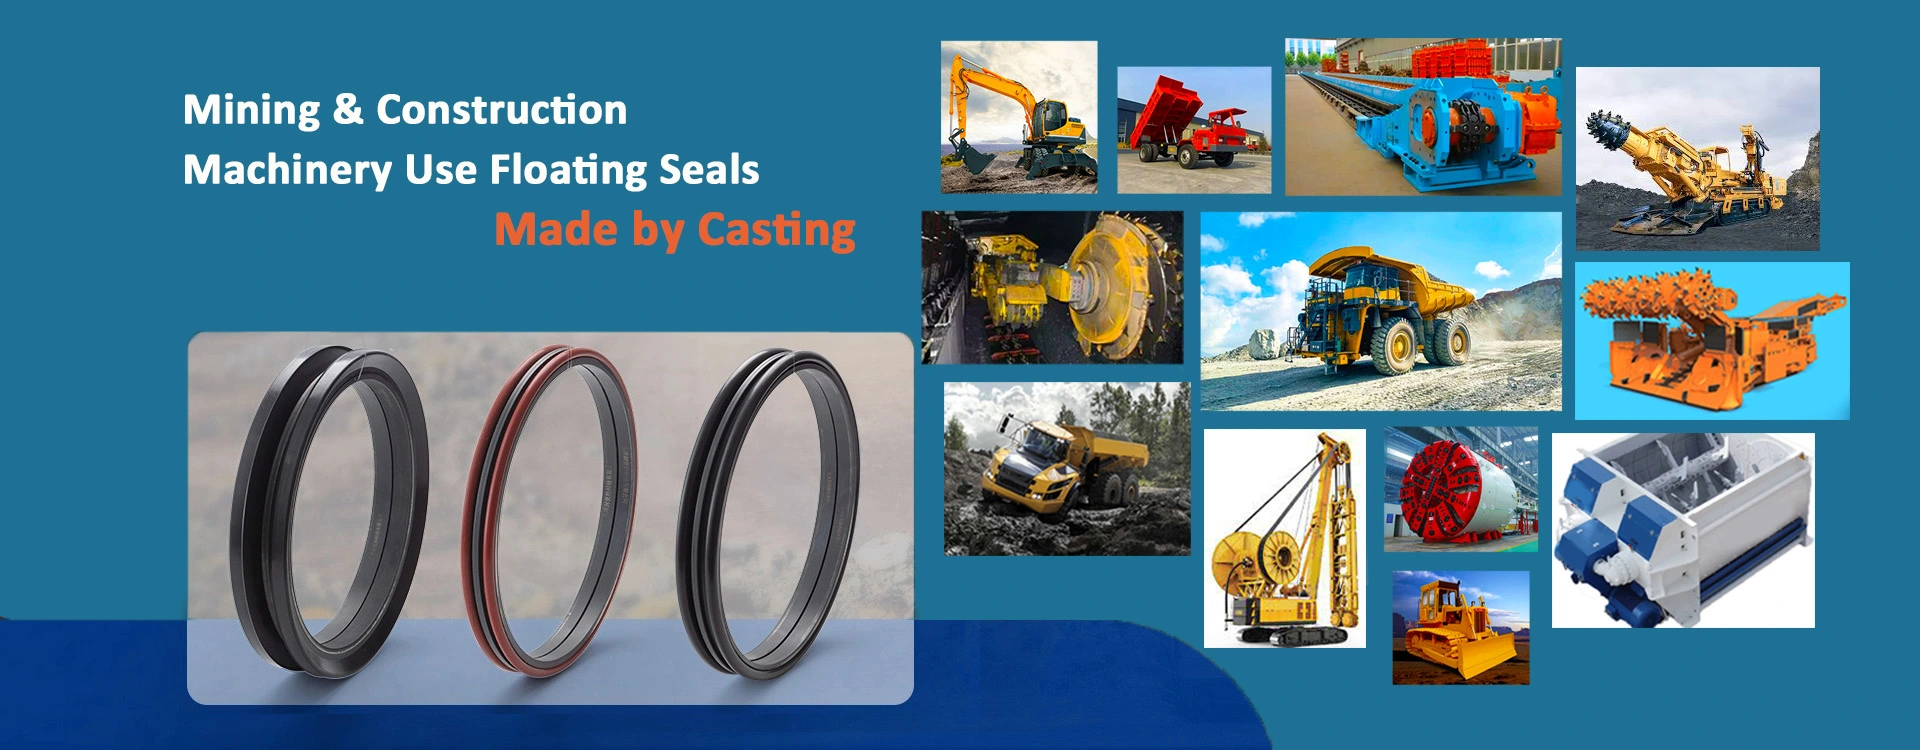 Machinery Use Floating Seals